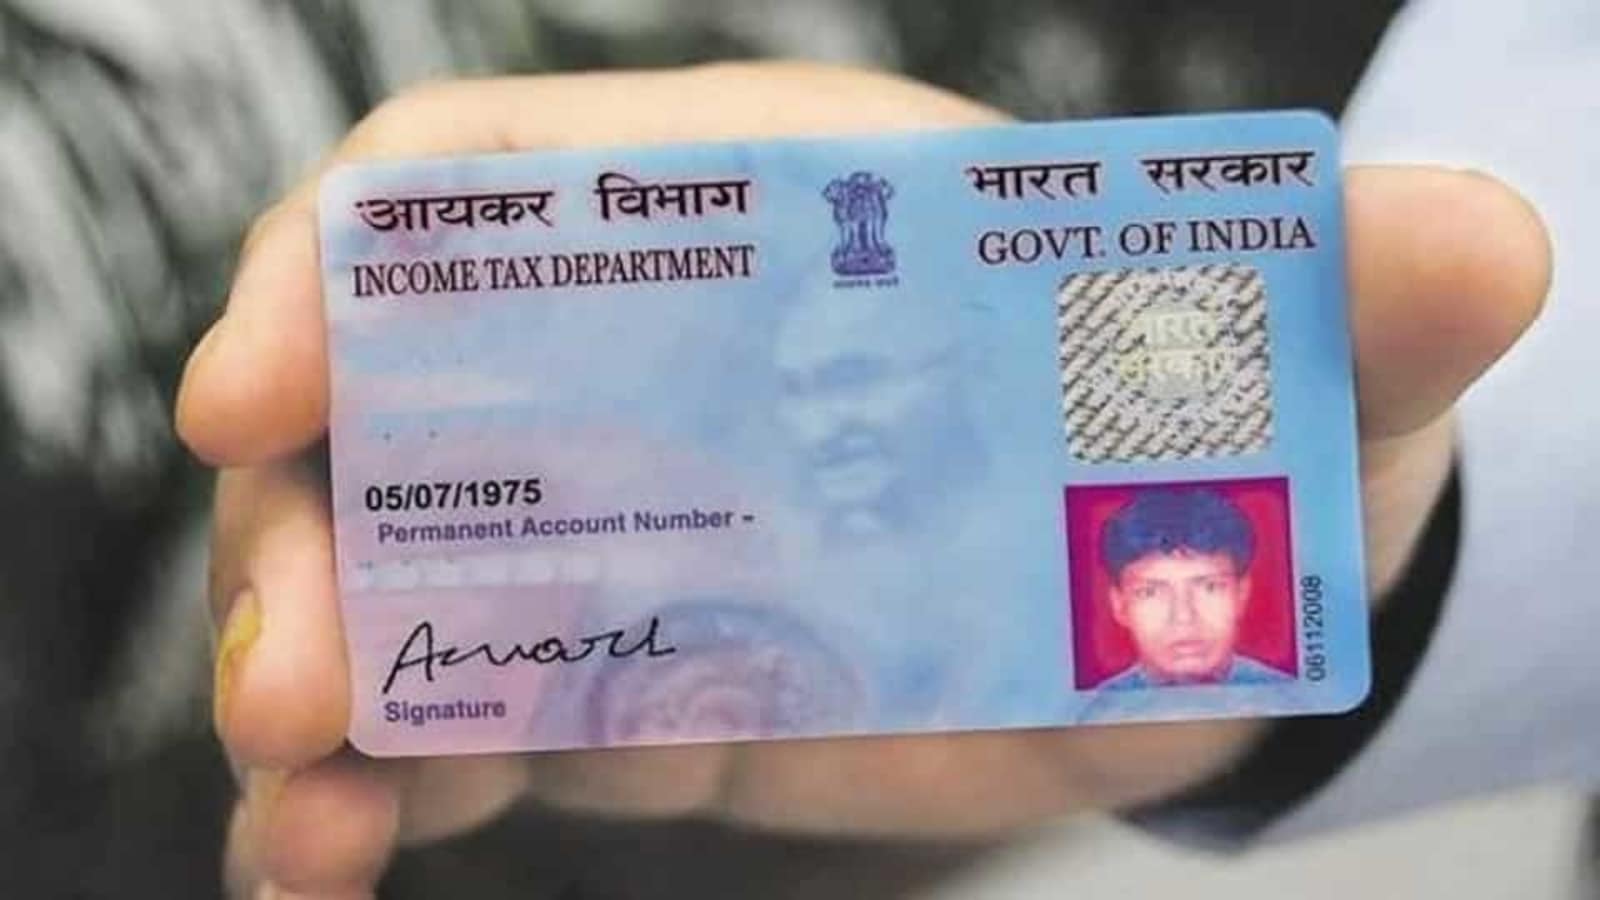 link-pan-card-to-aadhar-in-three-days-or-pay-a-fine-of-1-000-here-s